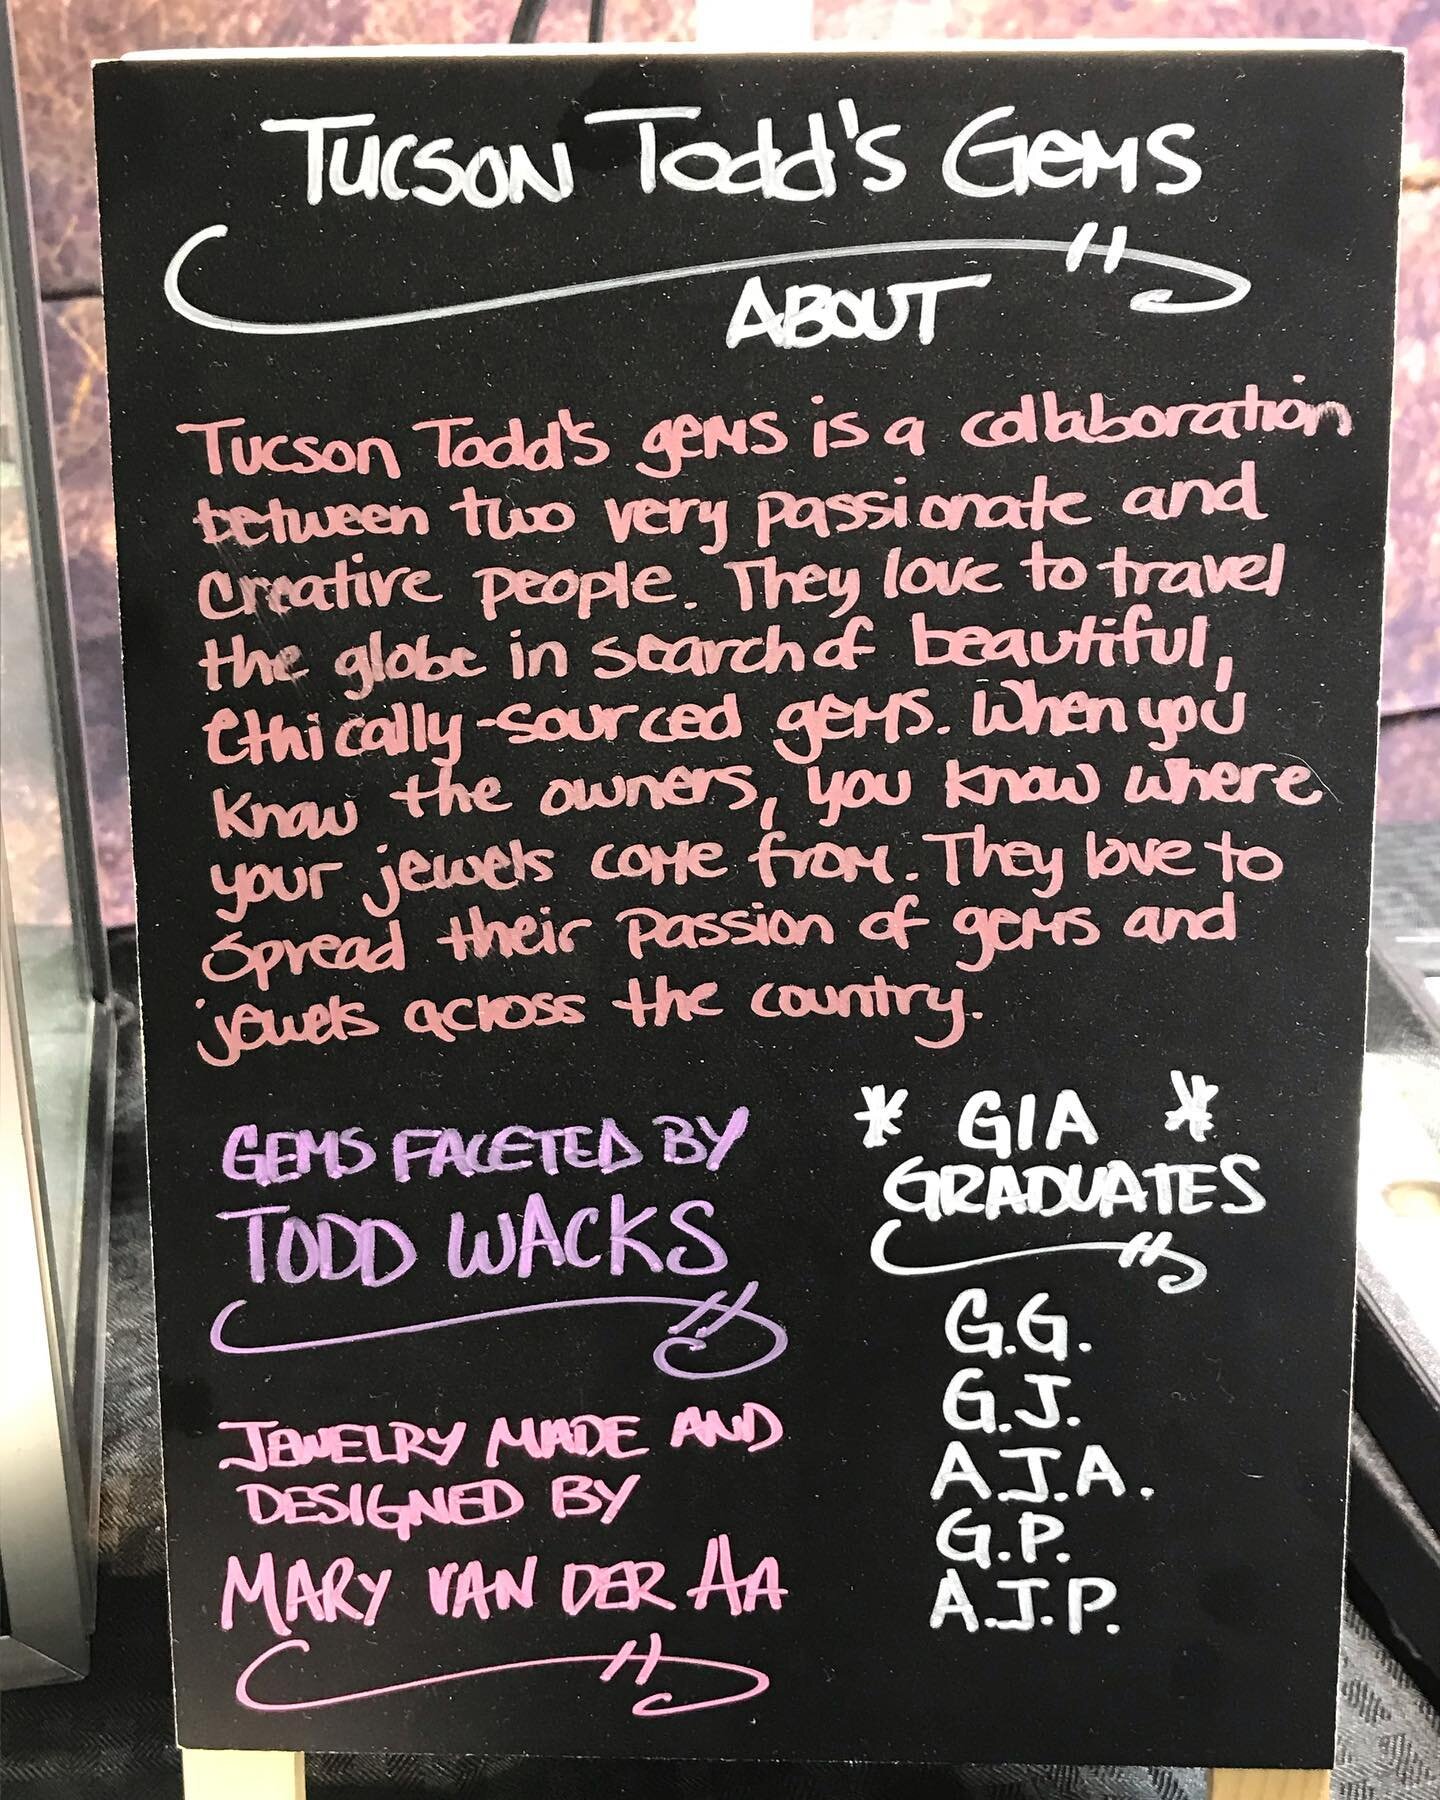 It&rsquo;s day two of the @pueblogemshow here in beautiful Tucson, Arizona! If you have been gracious enough to visit us at a gem show this sign will look familiar to you, but for those who don&rsquo;t know us here is a little intro! Mary and I are b